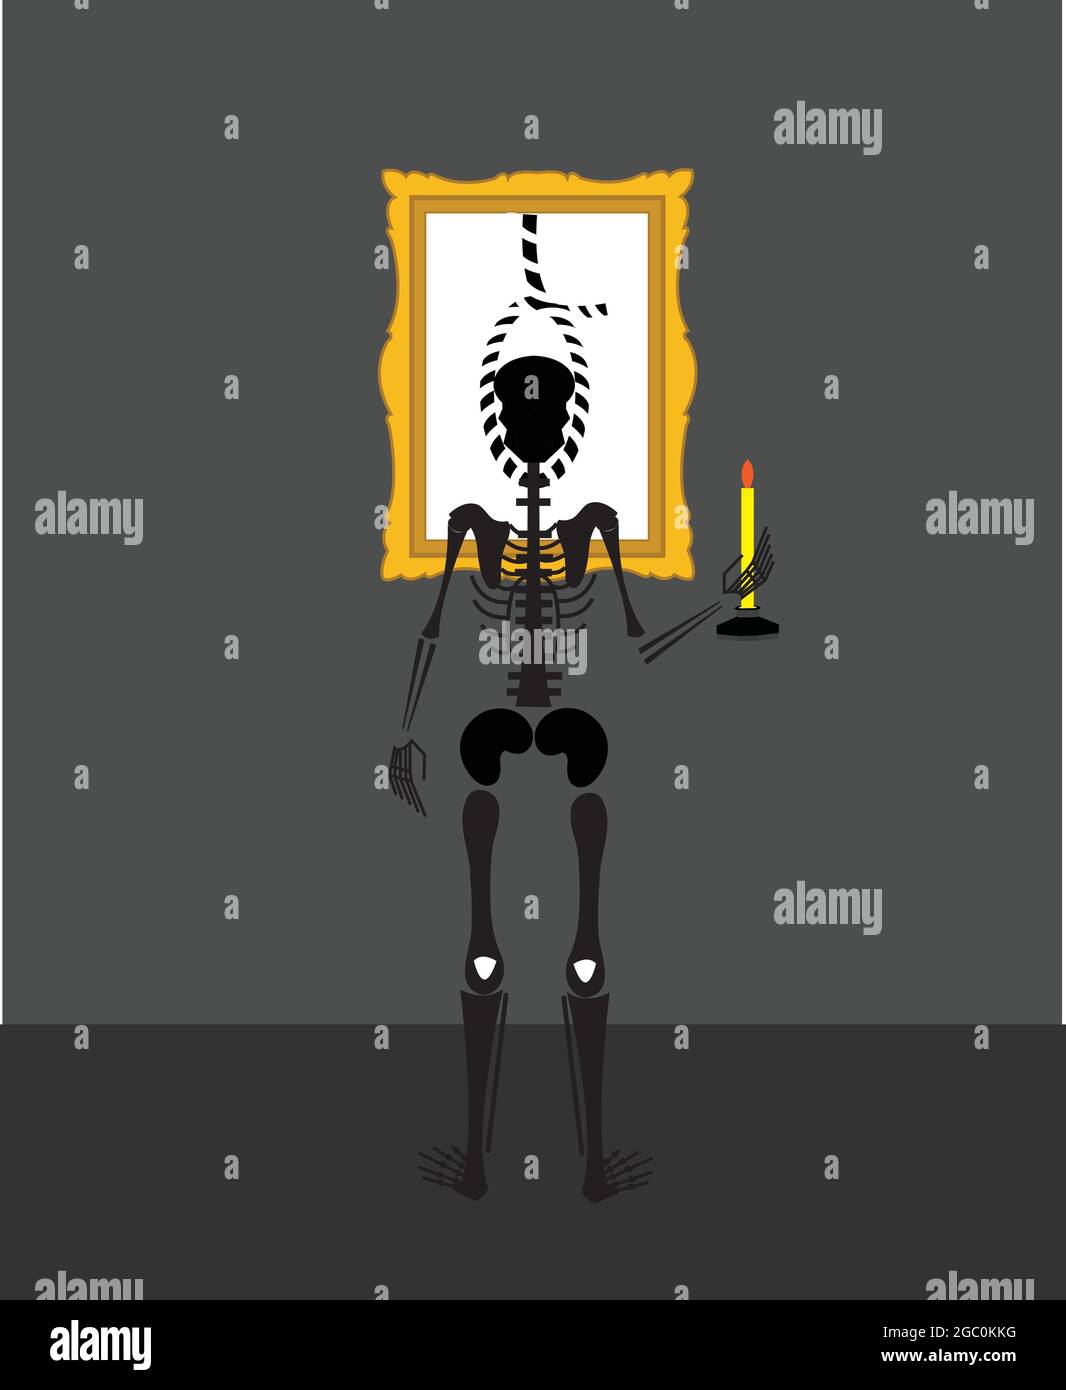 illustration of a skeleton in a museum holding a candle and being part of a painting in a hanging rope Stock Vector